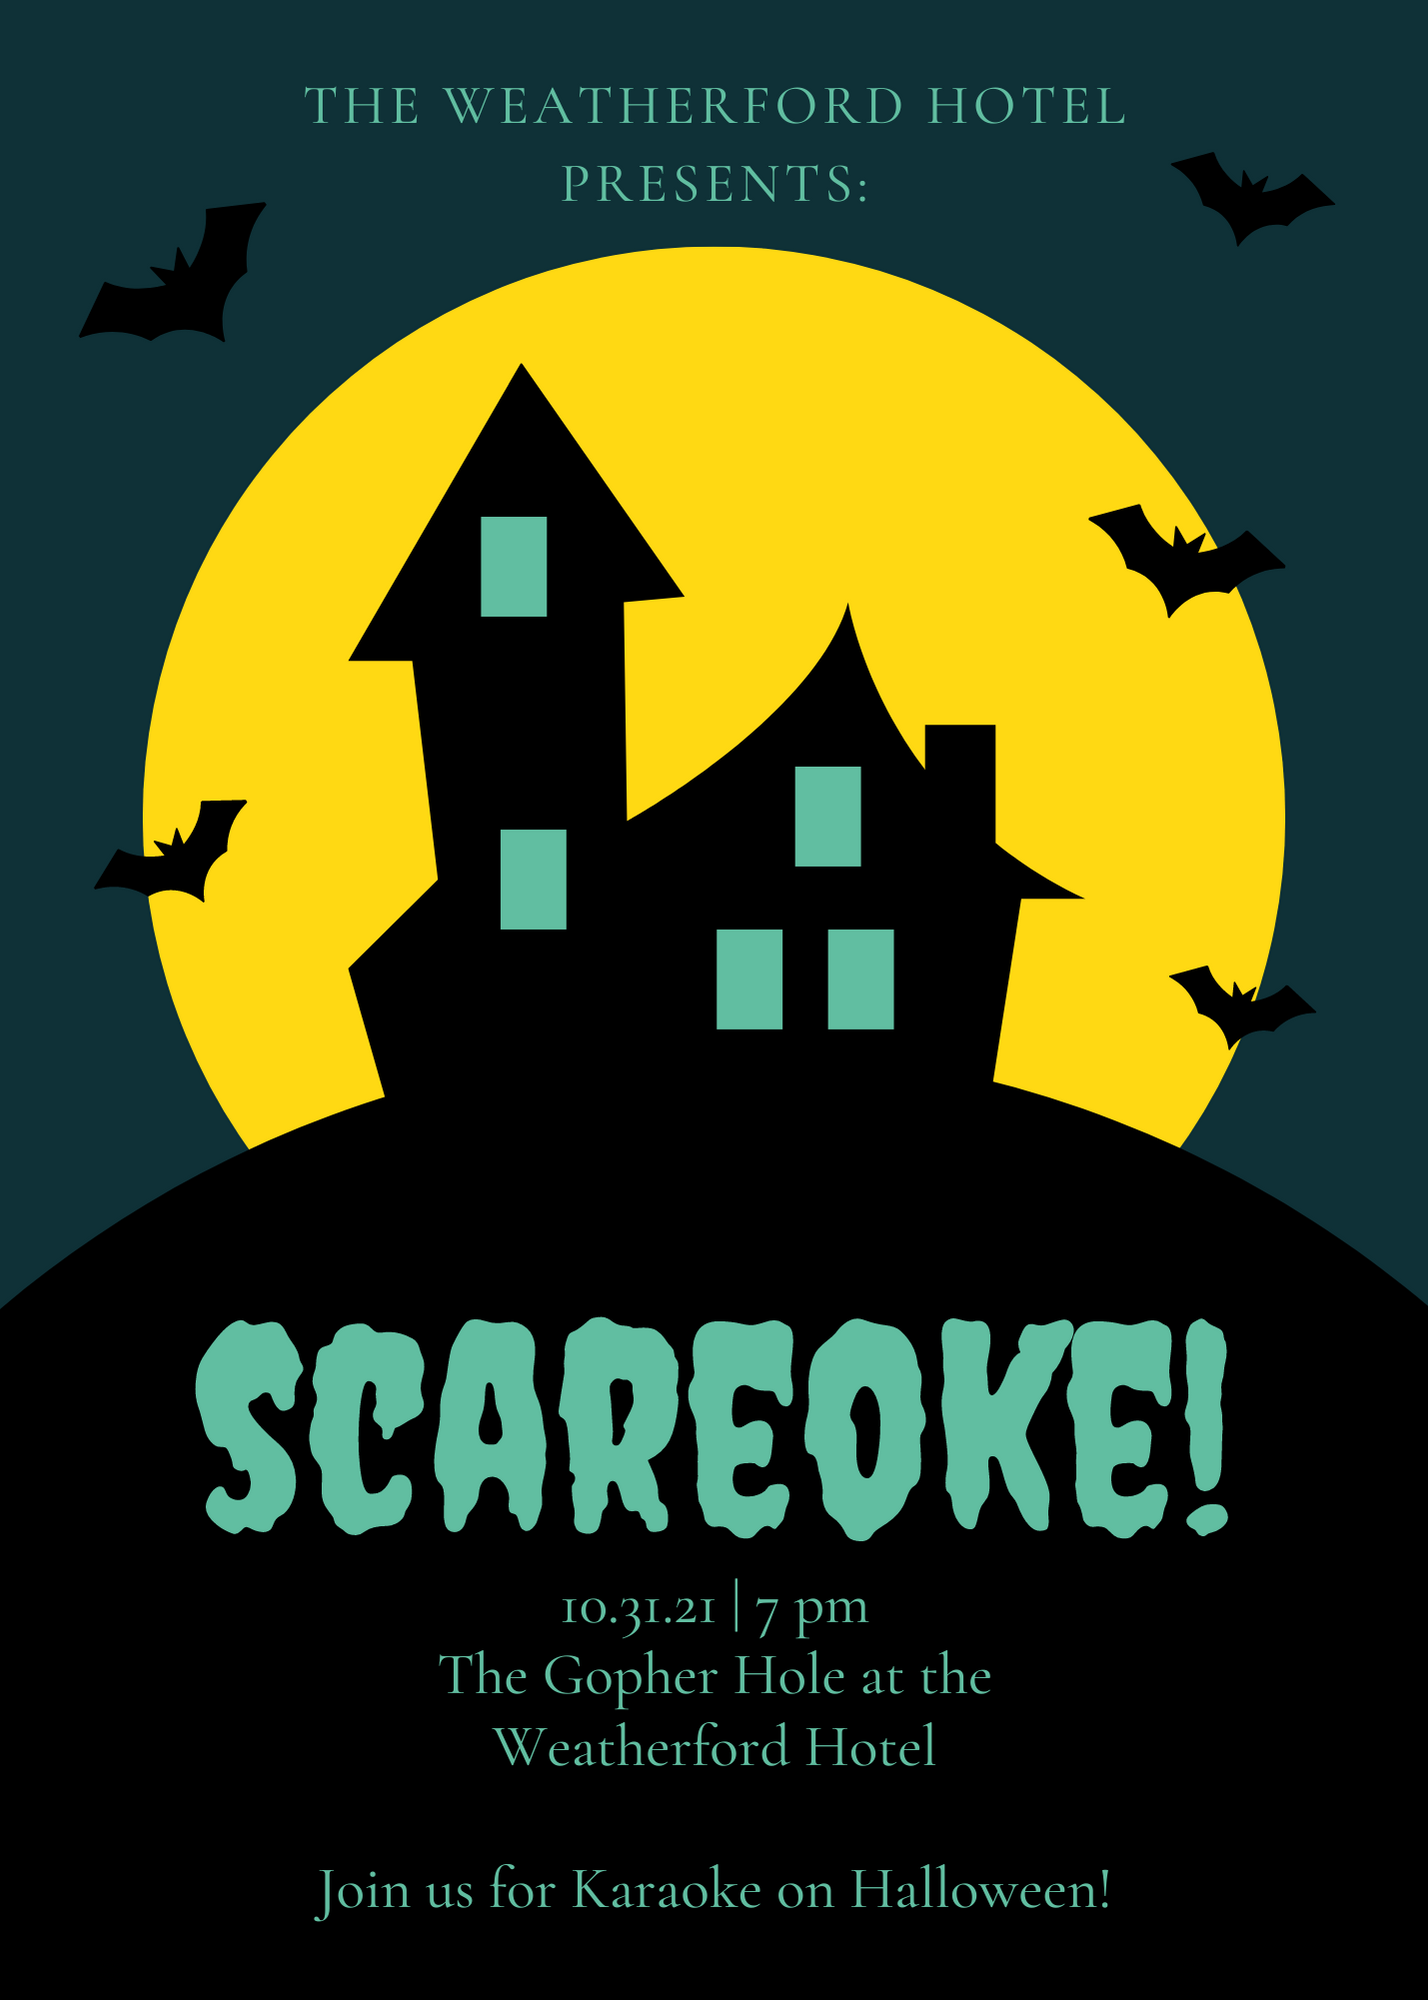 bring all your friends for scareoke karaoke at the Gopher Hole in Flagstaff AZ